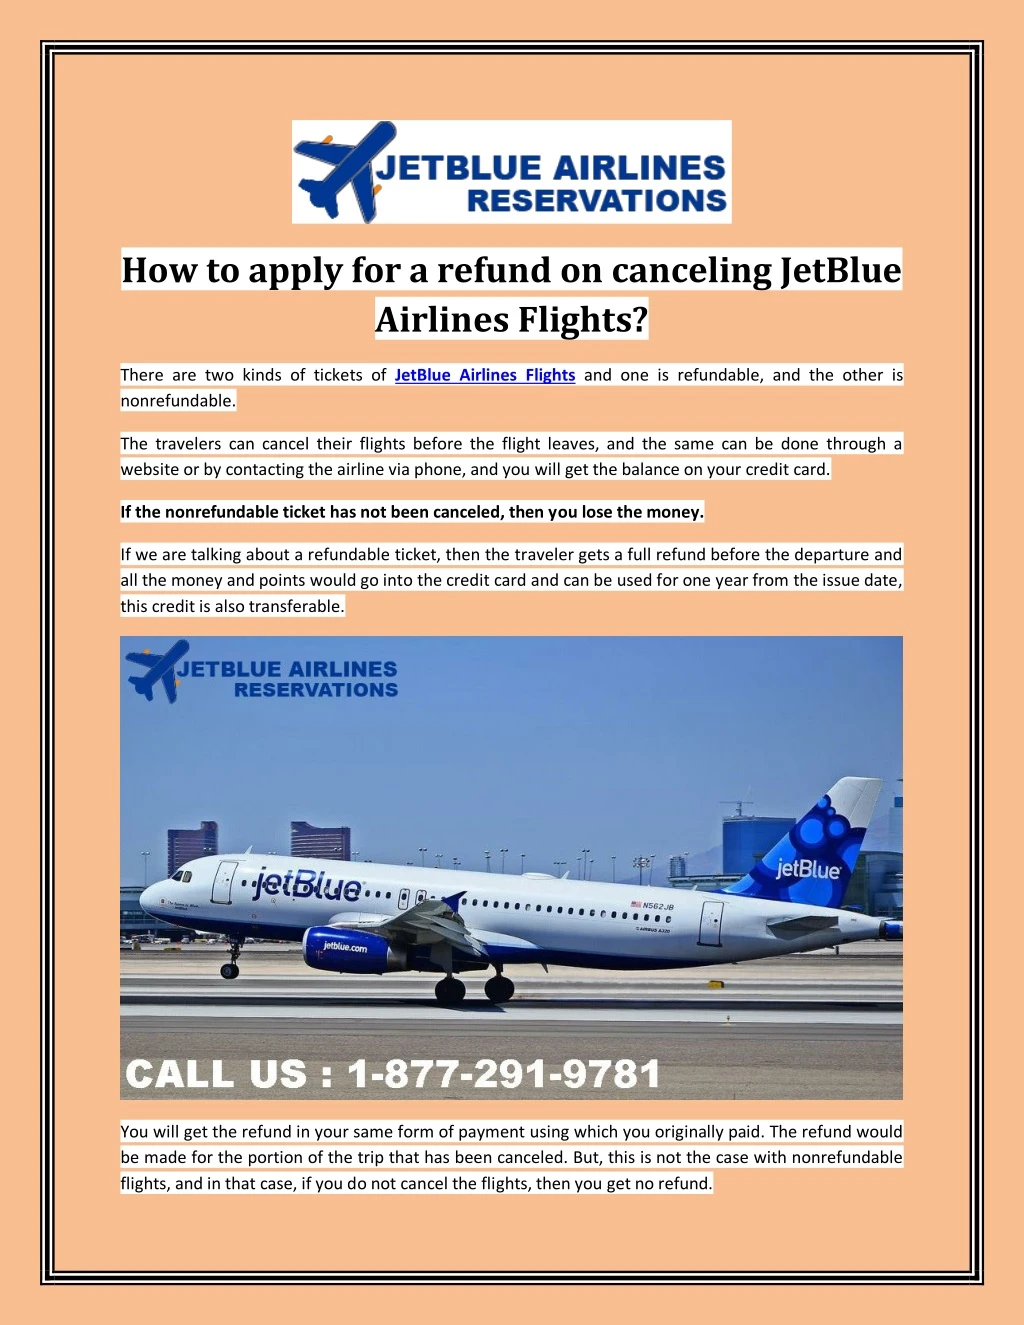 how to apply for a refund on canceling jetblue